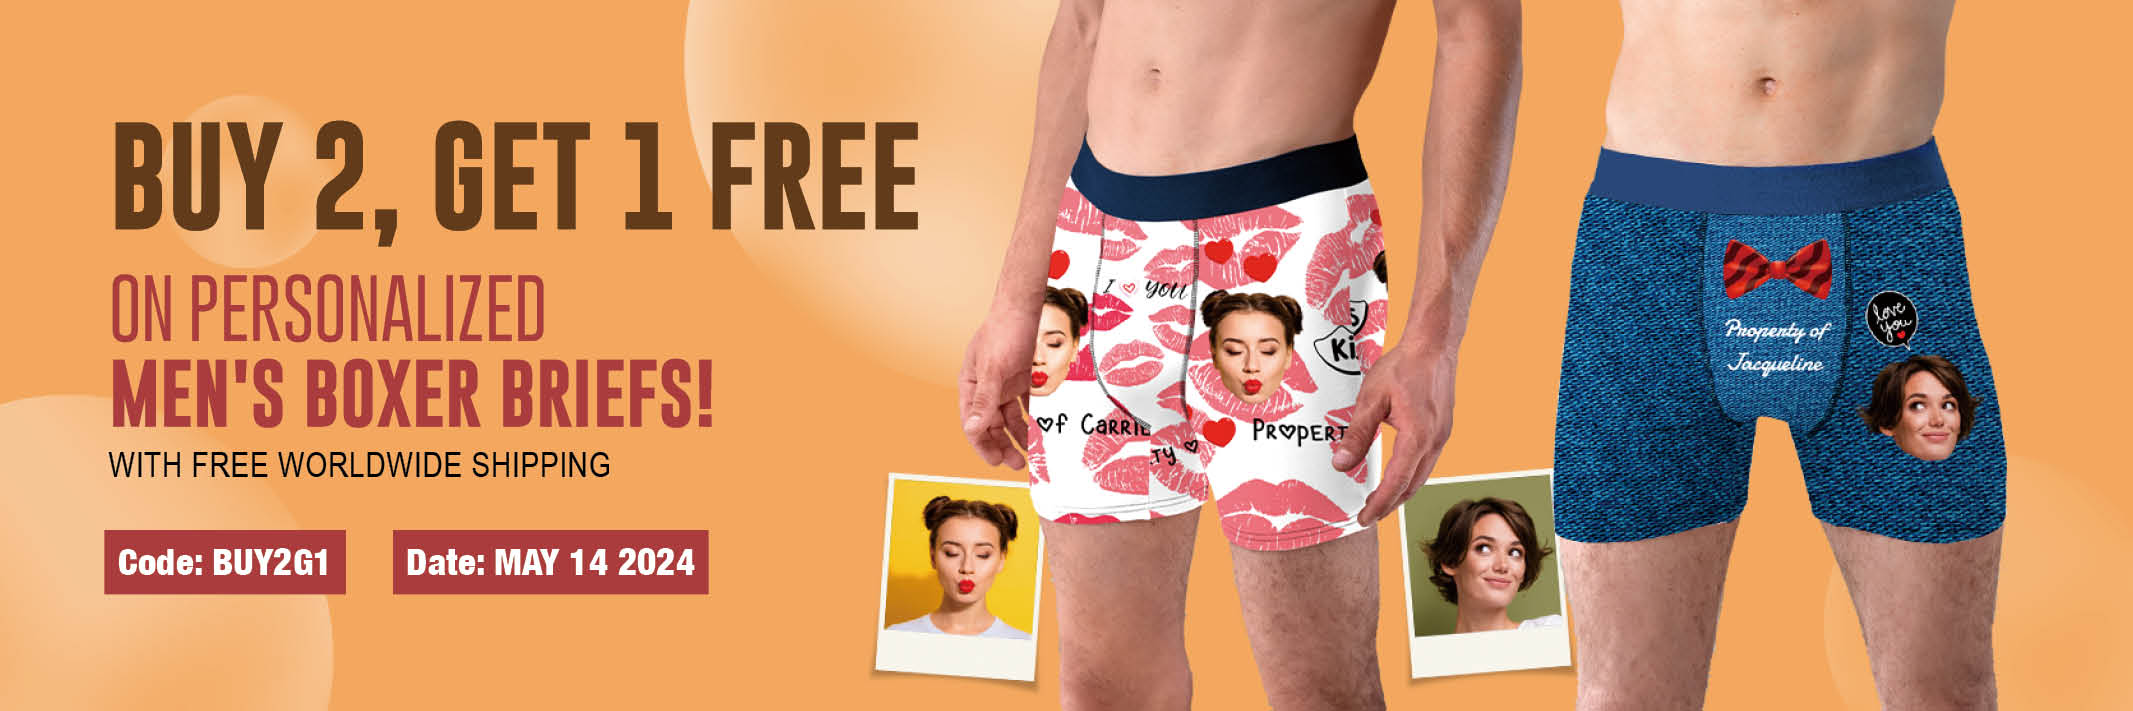 Buy 2, Get 1 Free on Personalized Men's Boxer Briefs with Free Worldwide Shipping!